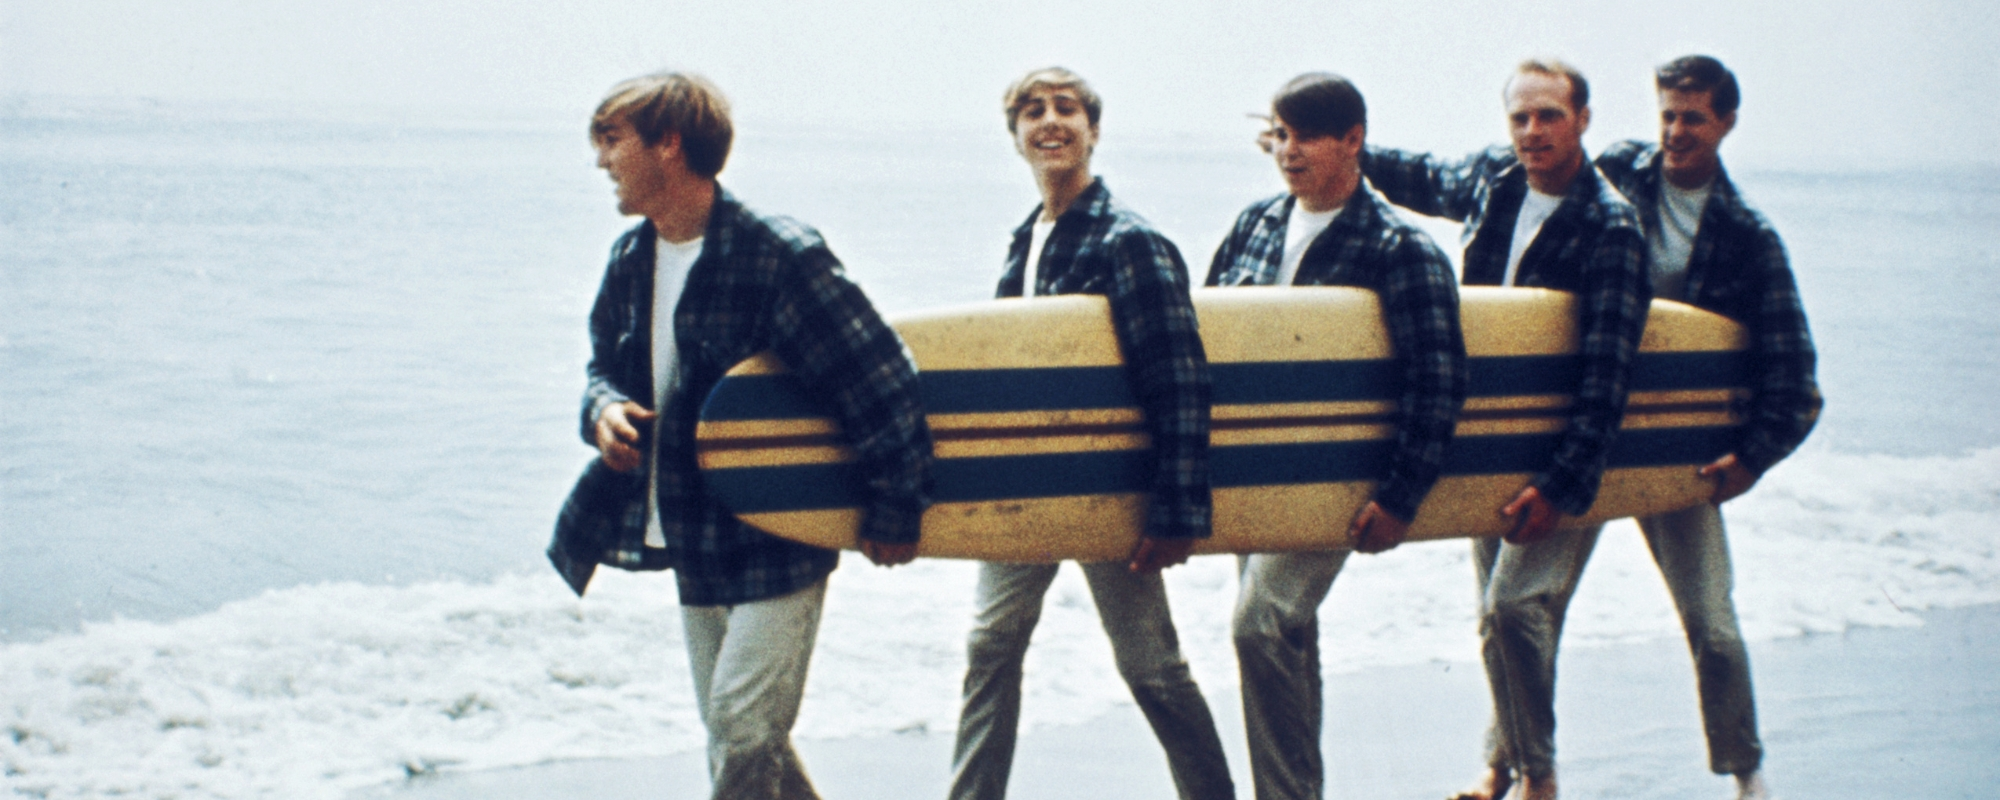 The Geographical Meaning Behind “Surfin’ U.S.A.” by The Beach Boys